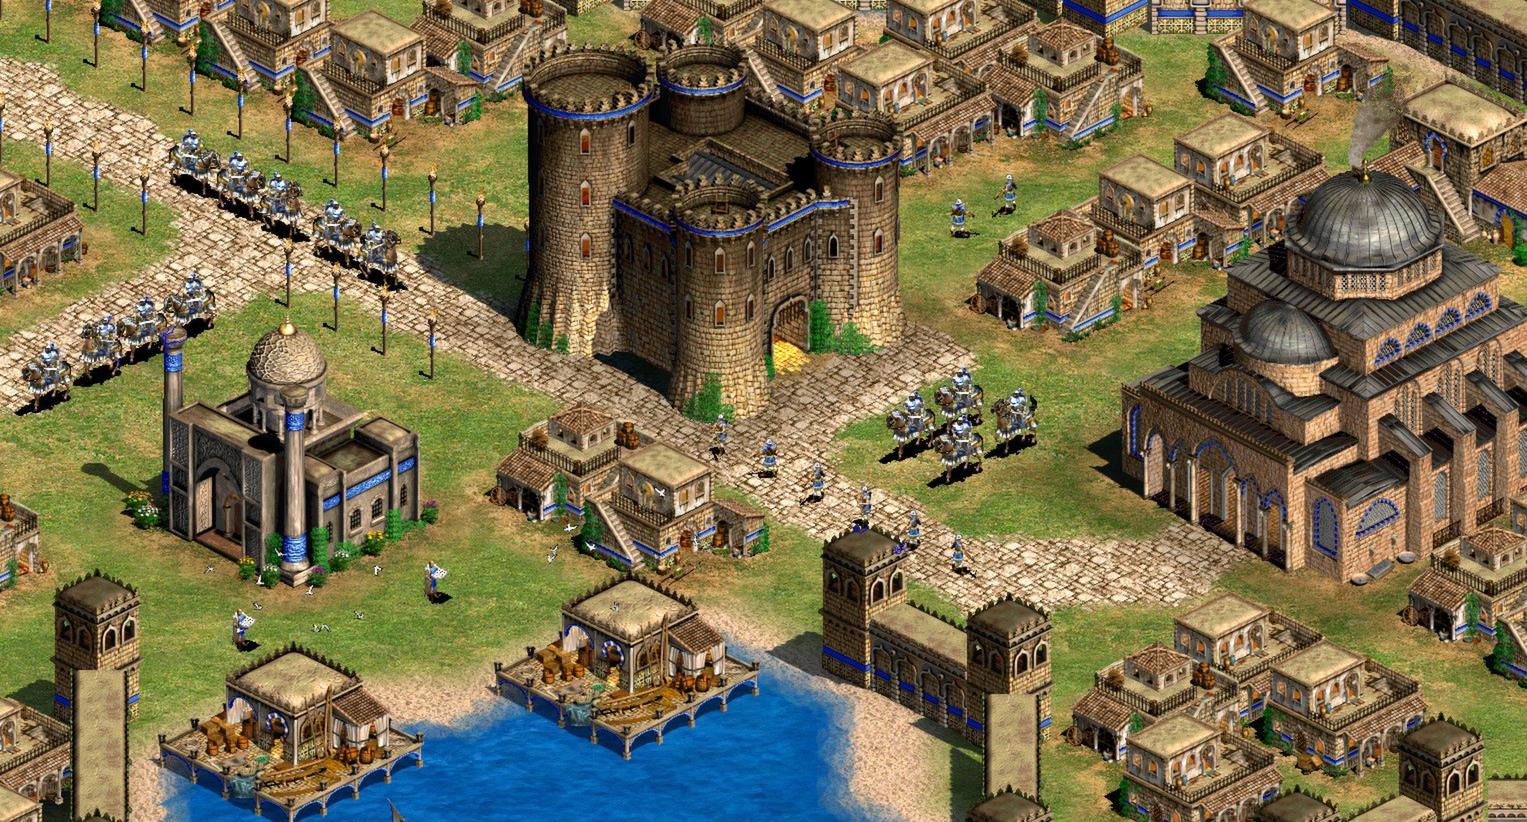 steam age of empires 2 definitive edition